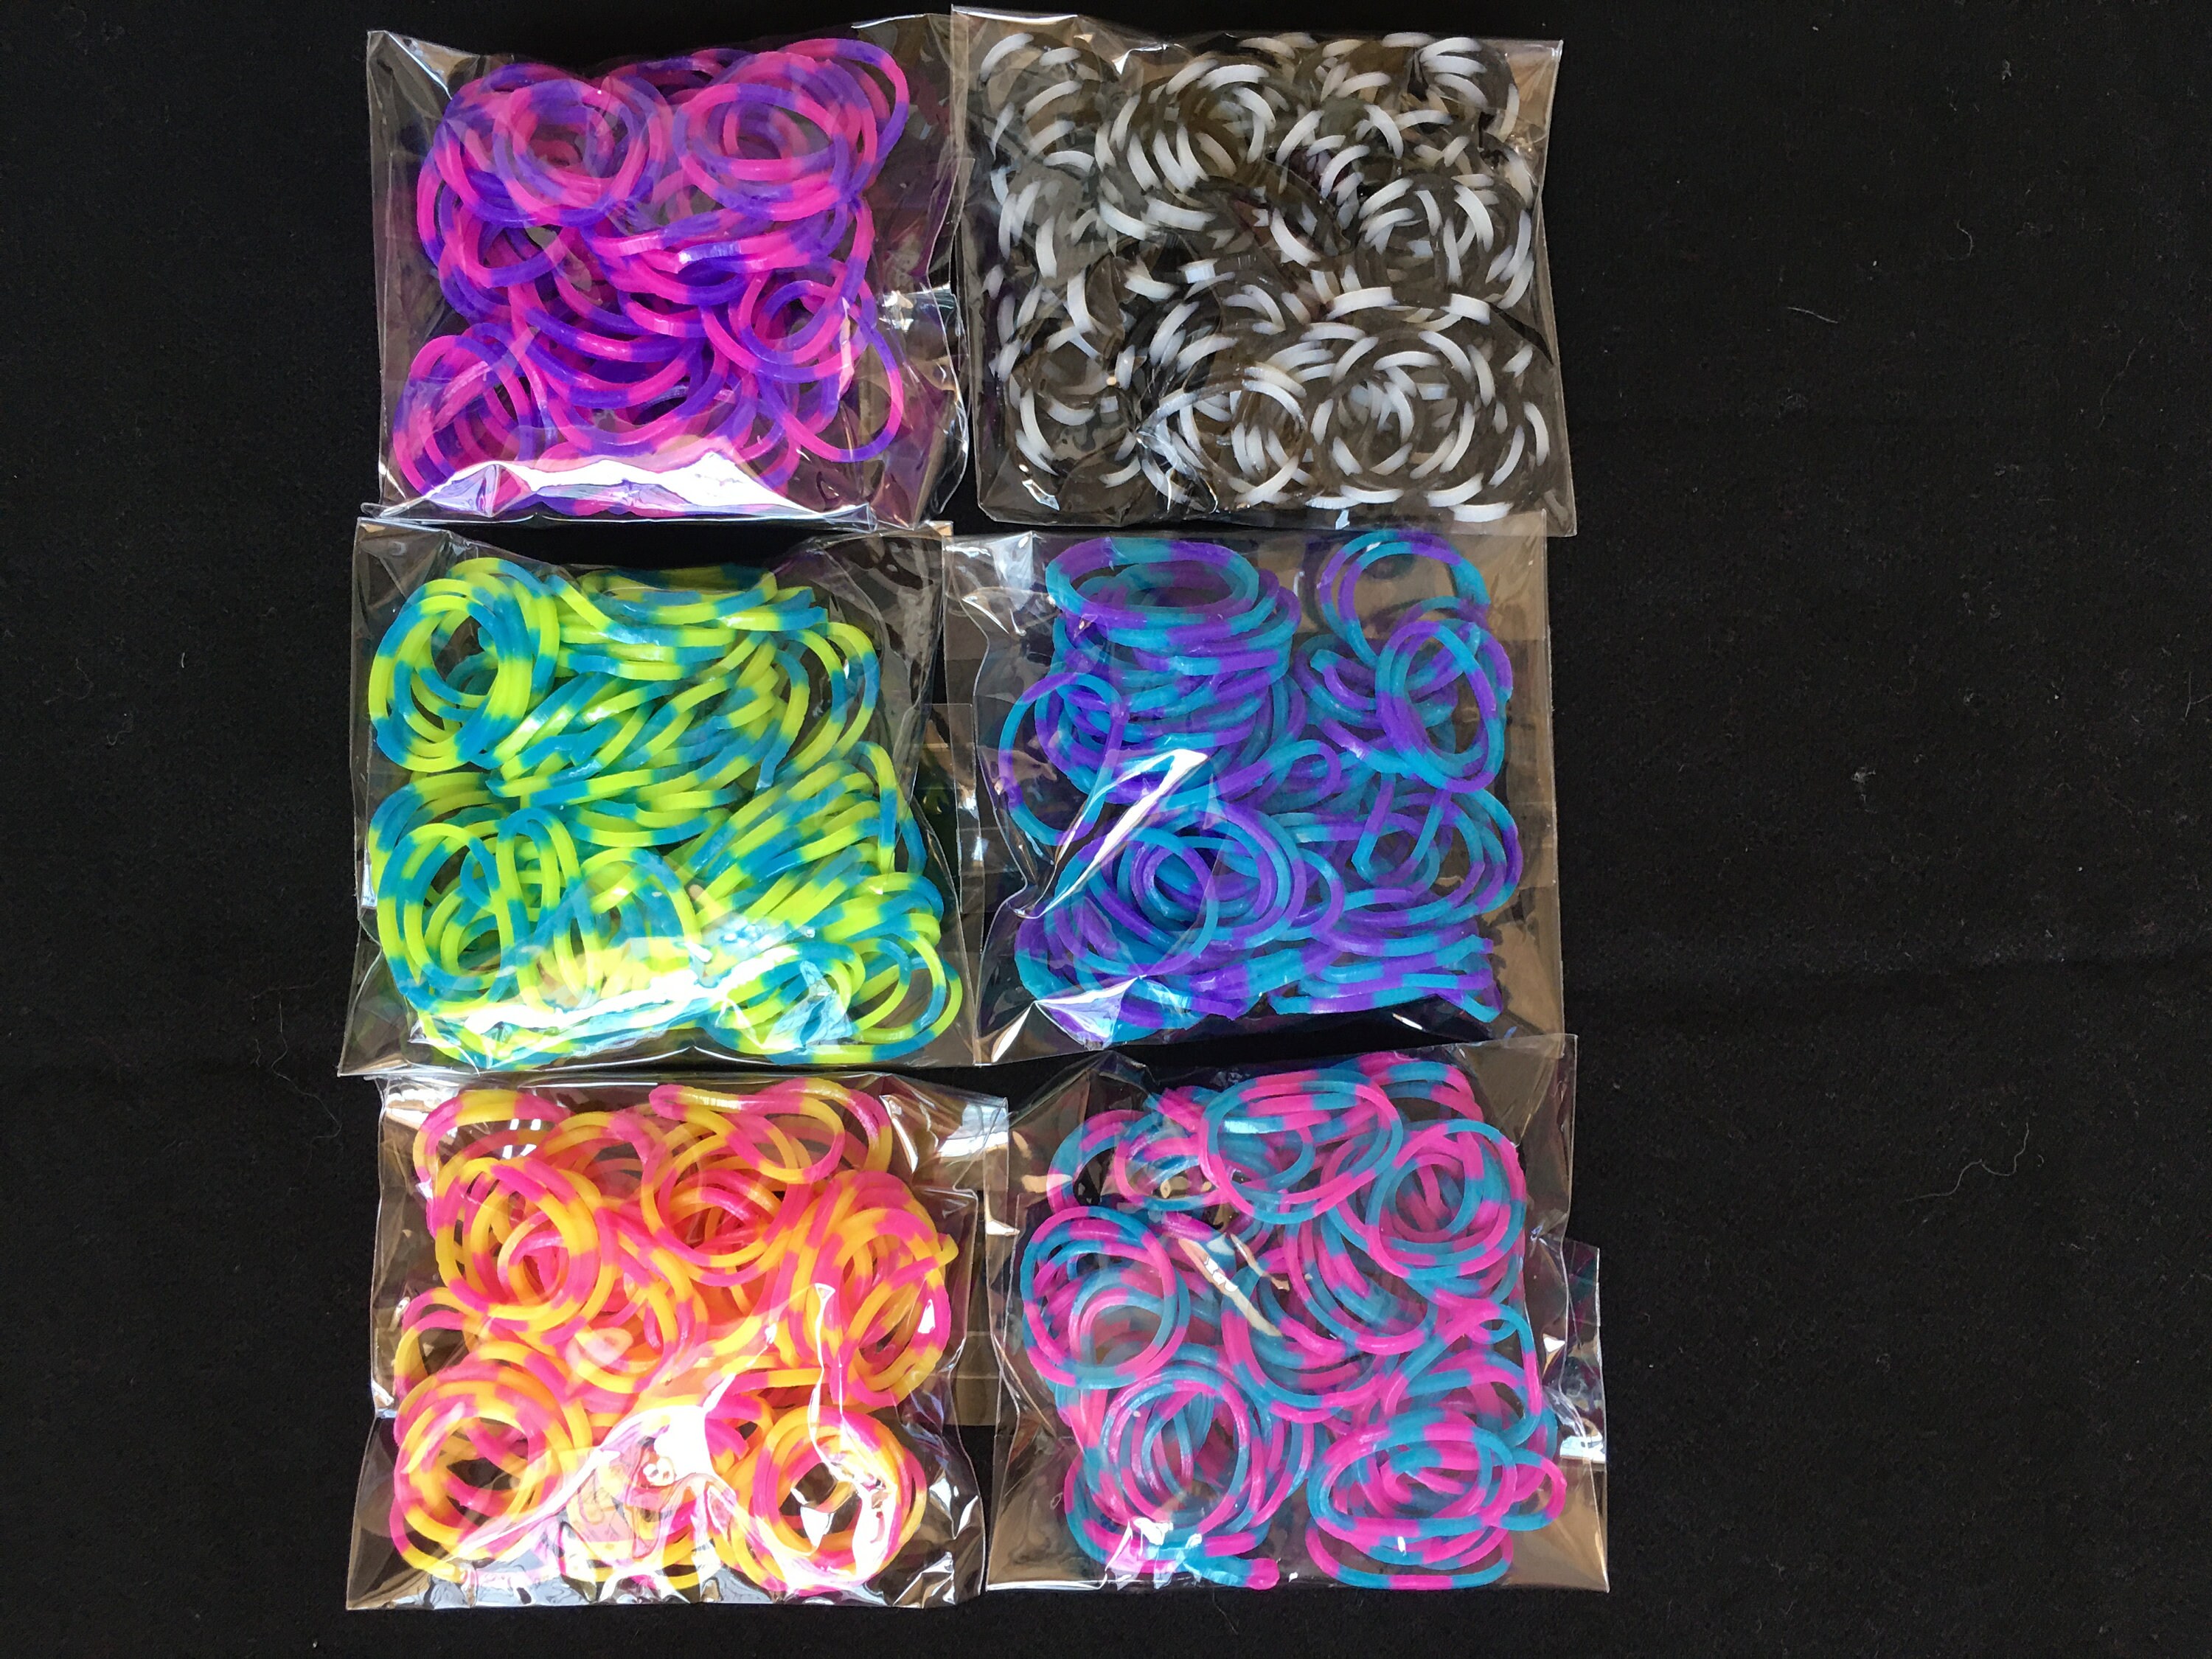 WIVOWI Loom 5200+ Rubber Bands Refill Loom Set: 8 Colors Glow in The Dark 5000 Loom Bands,200 Colored S-Clips,10 Charms,1 Upgrade Crochet Hook for